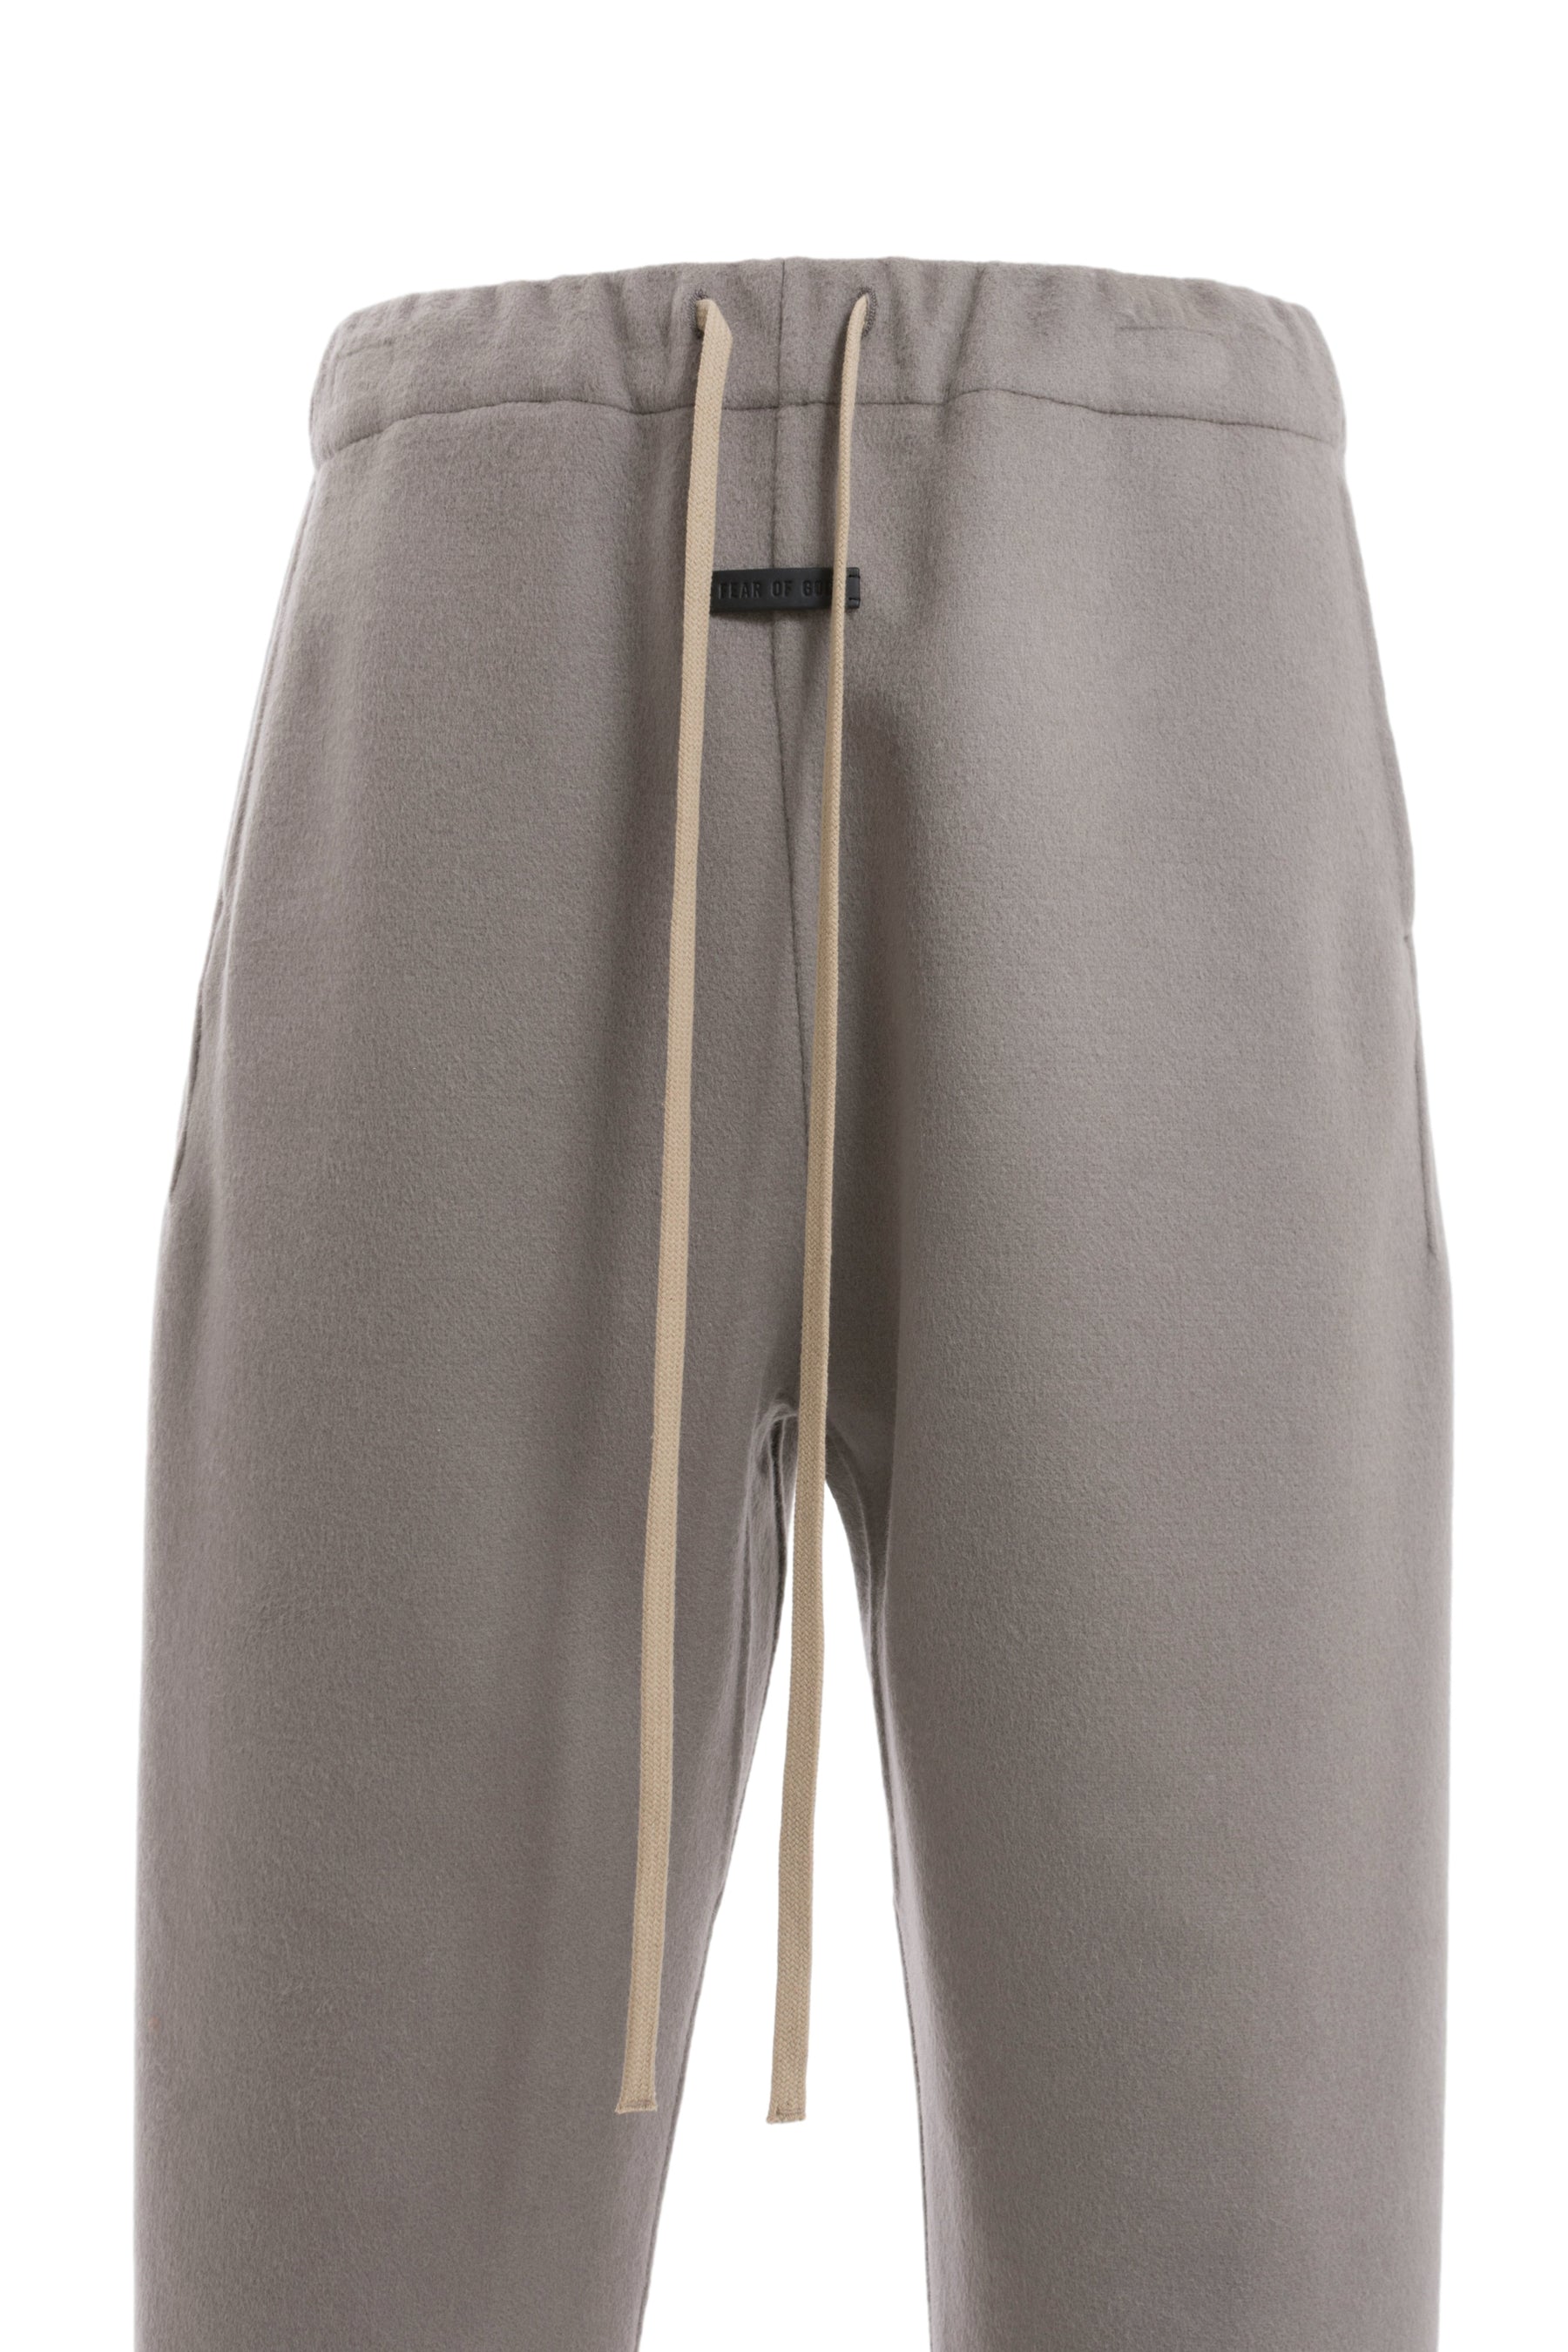 FEAR OF GOD THE ETERNAL COLLECTION ETERNAL WOOL CASHMERE PANT